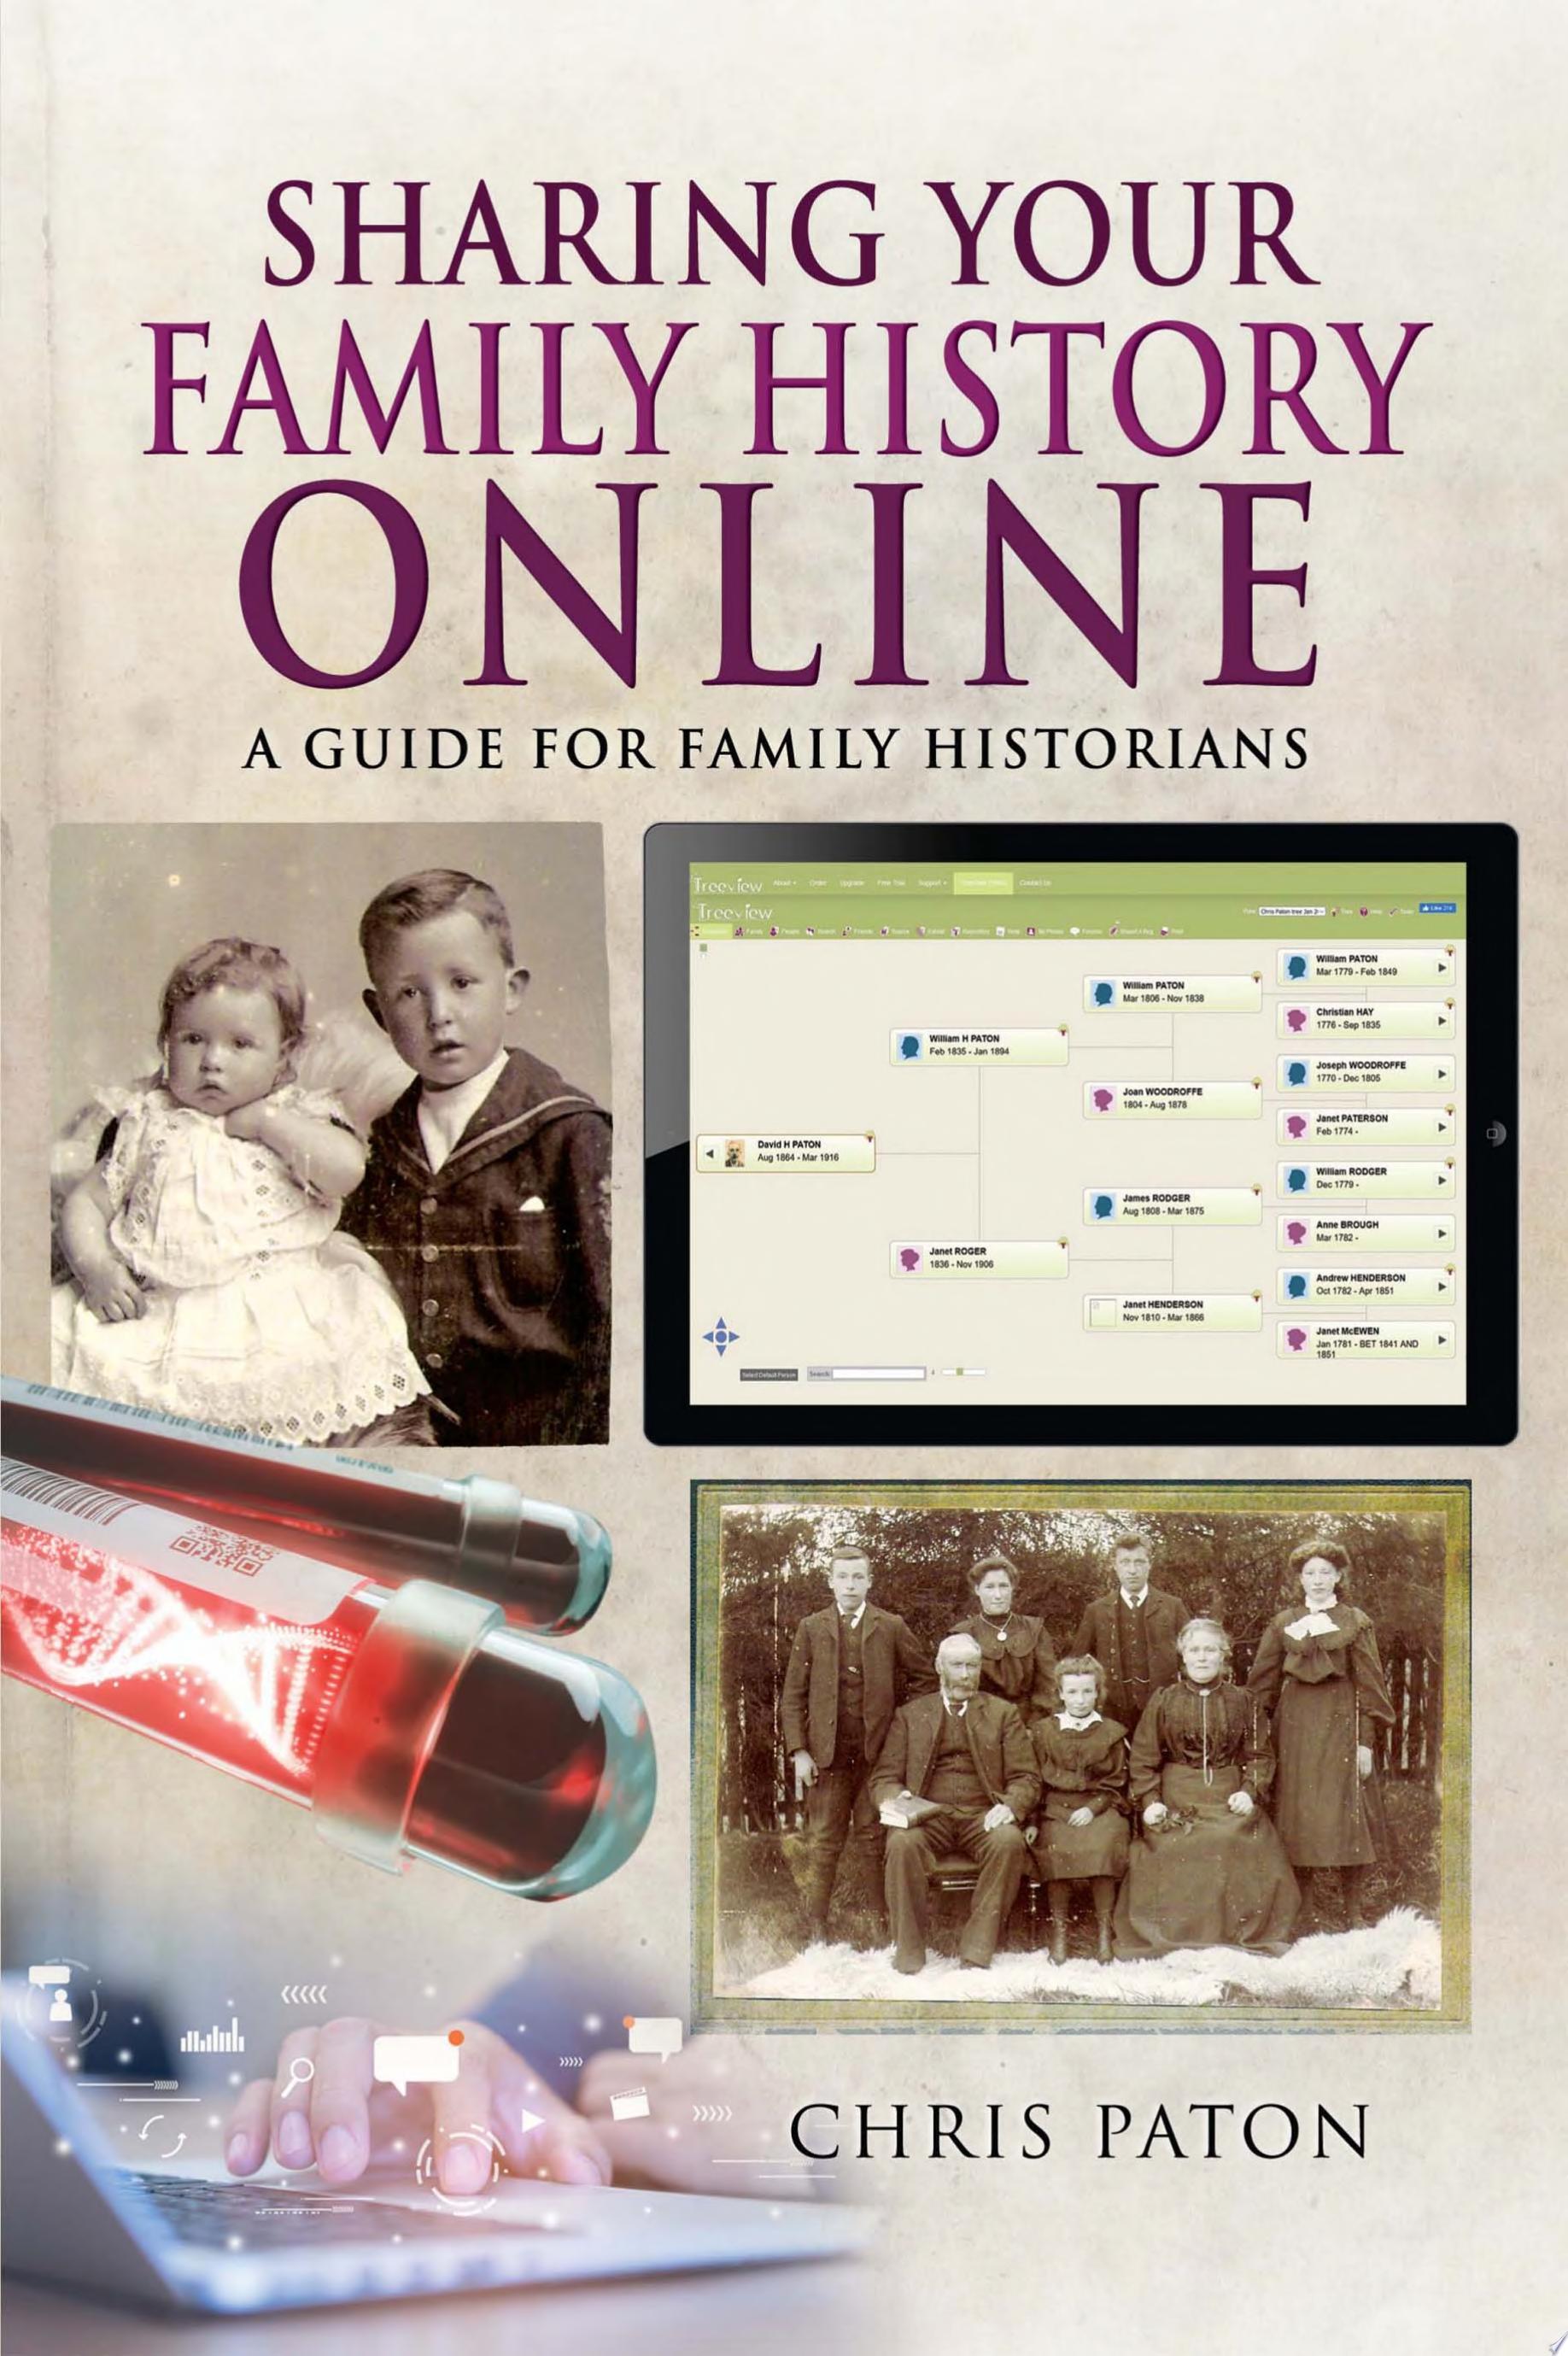 Image for "Sharing Your Family History Online"